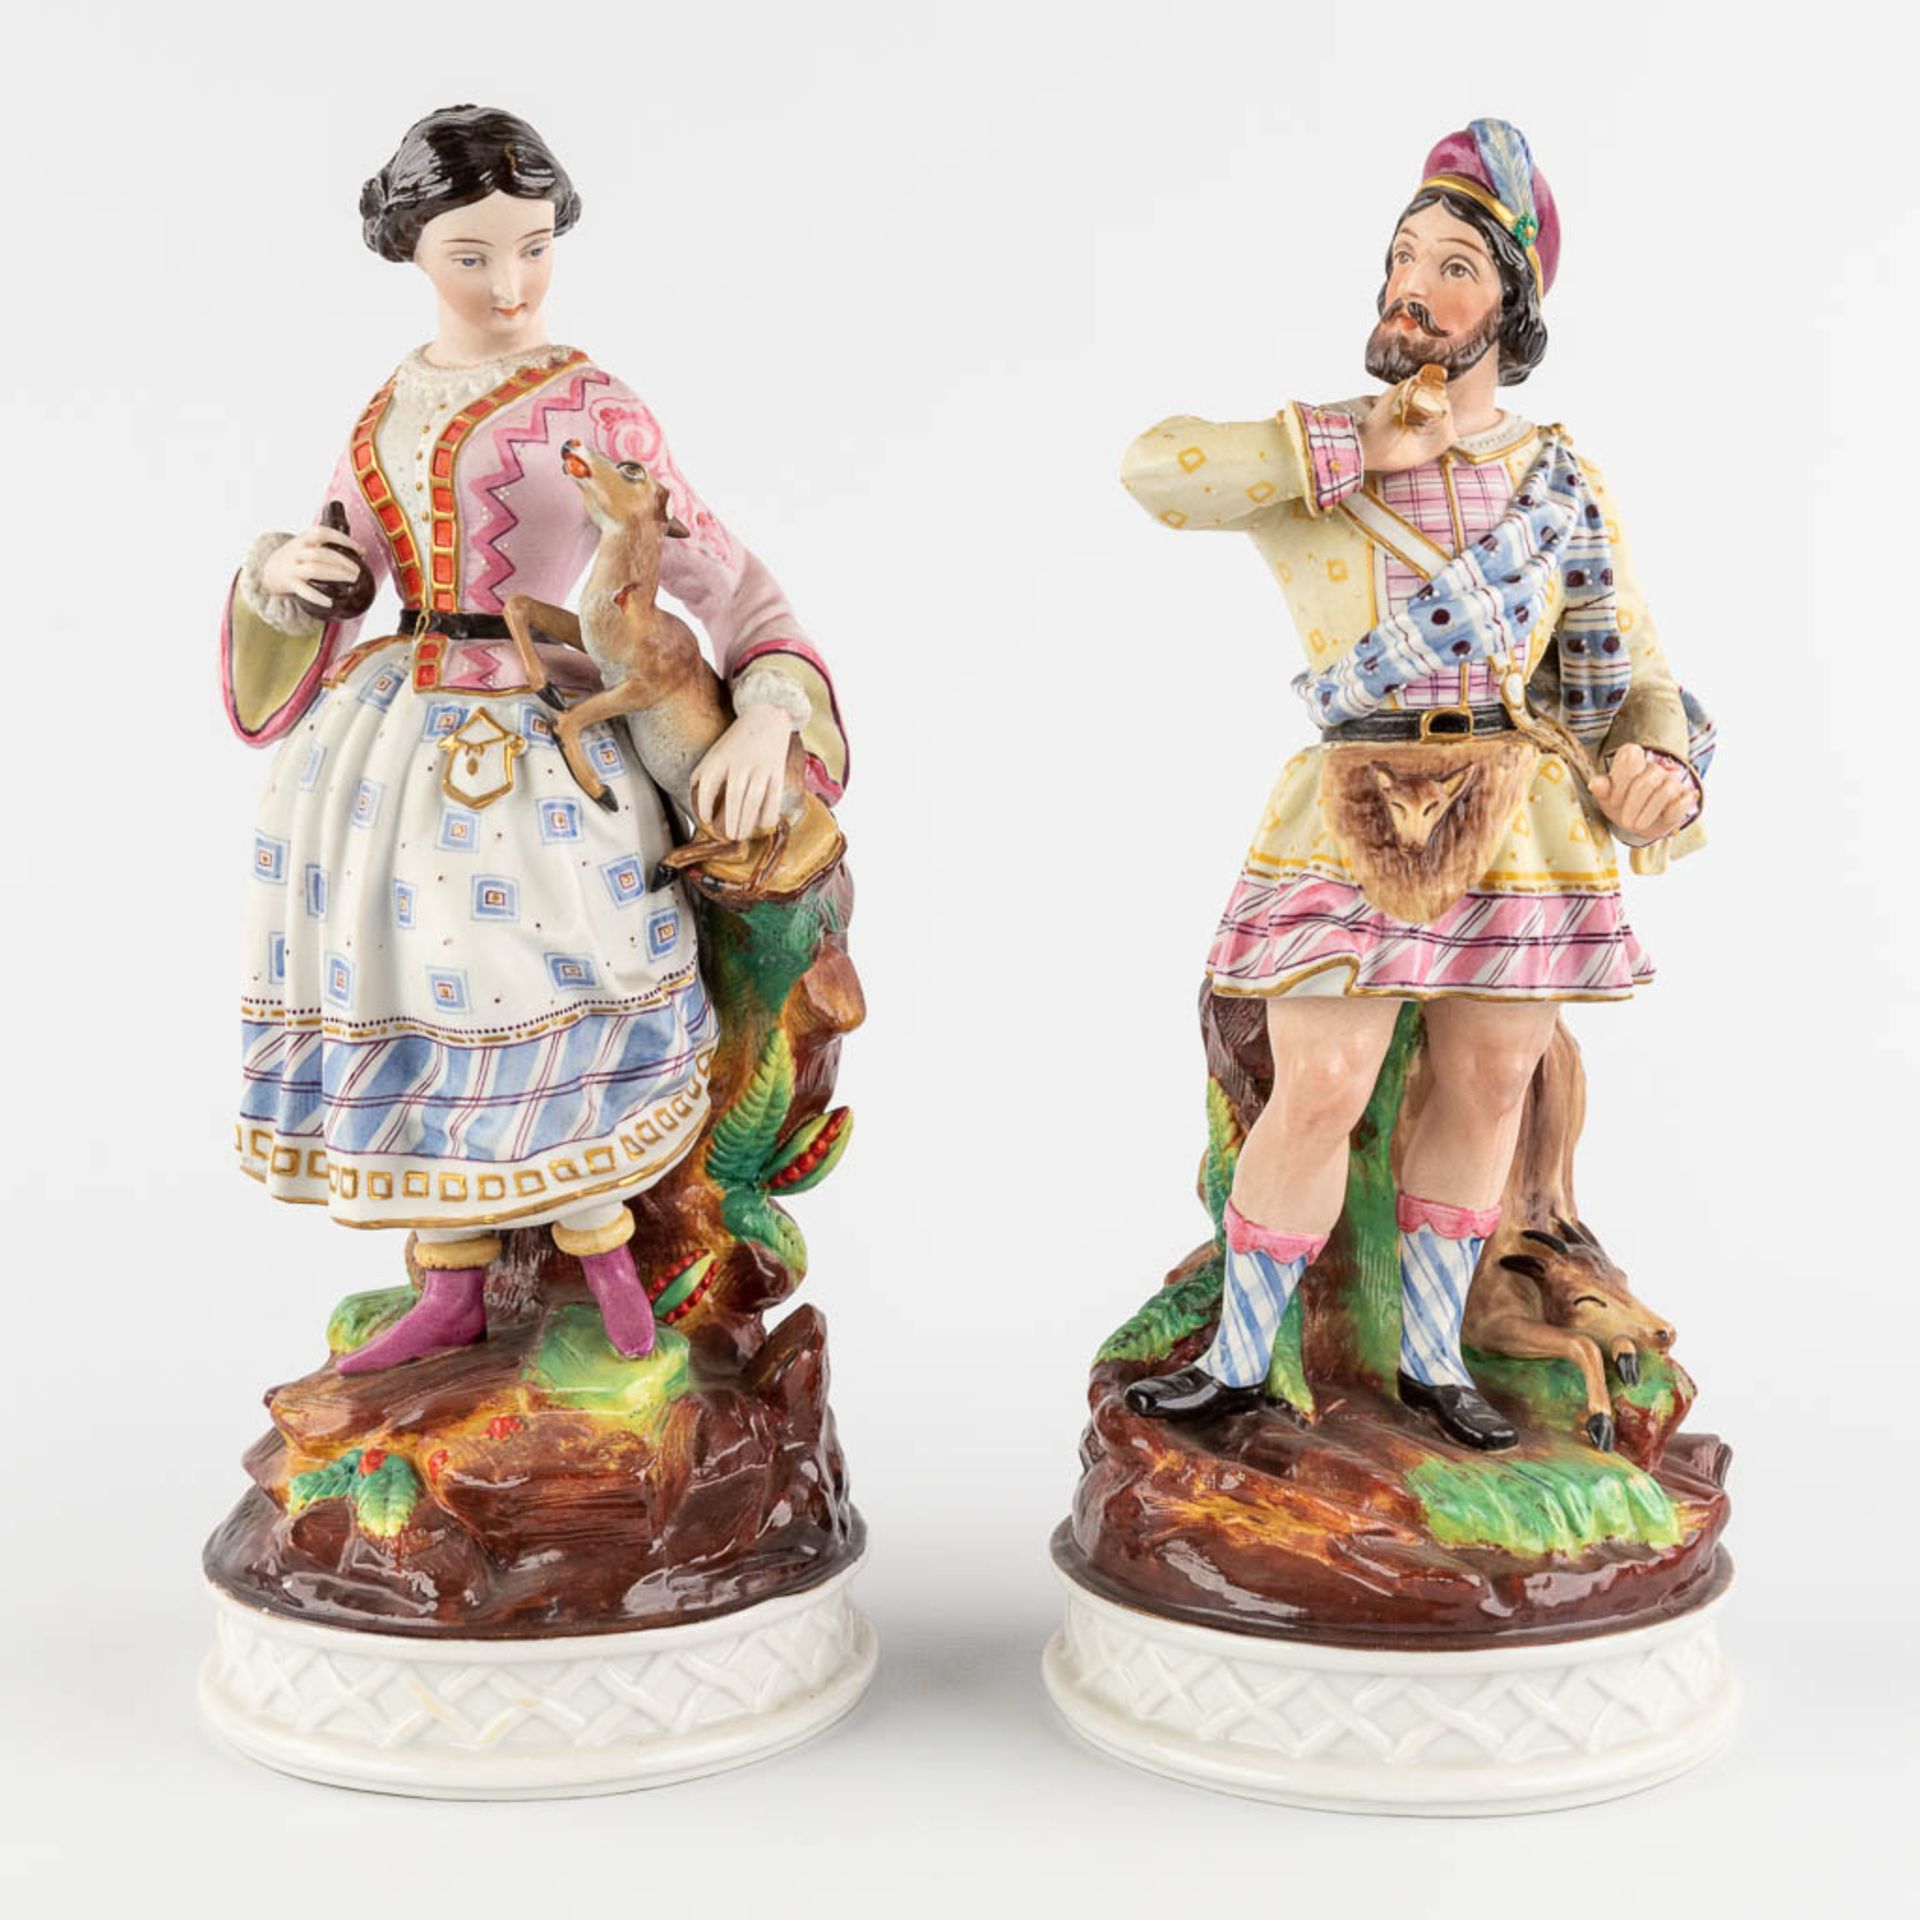 A pair of bisque porcelain figurines with images of the hunt, probably England. 19th C. (H:29 cm)